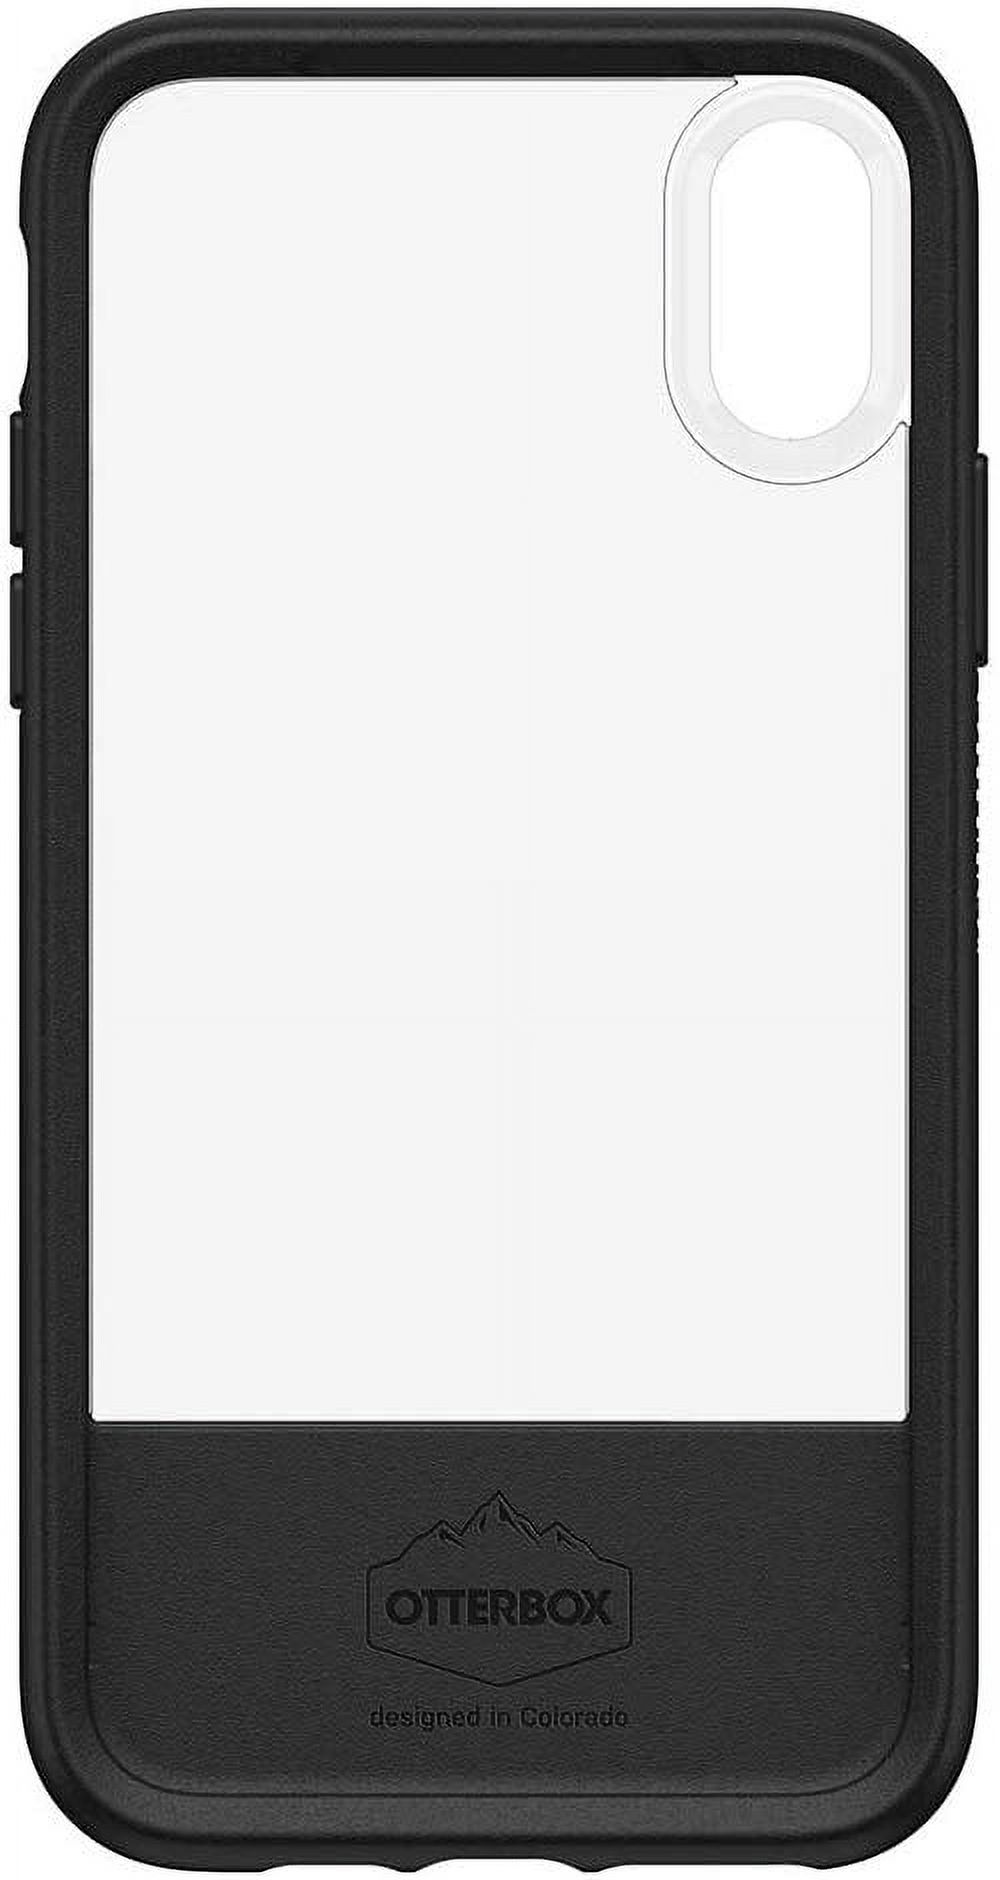 OtterBox Clear Case for iPhone Xs and iPhone X, Lucent Black - image 3 of 4